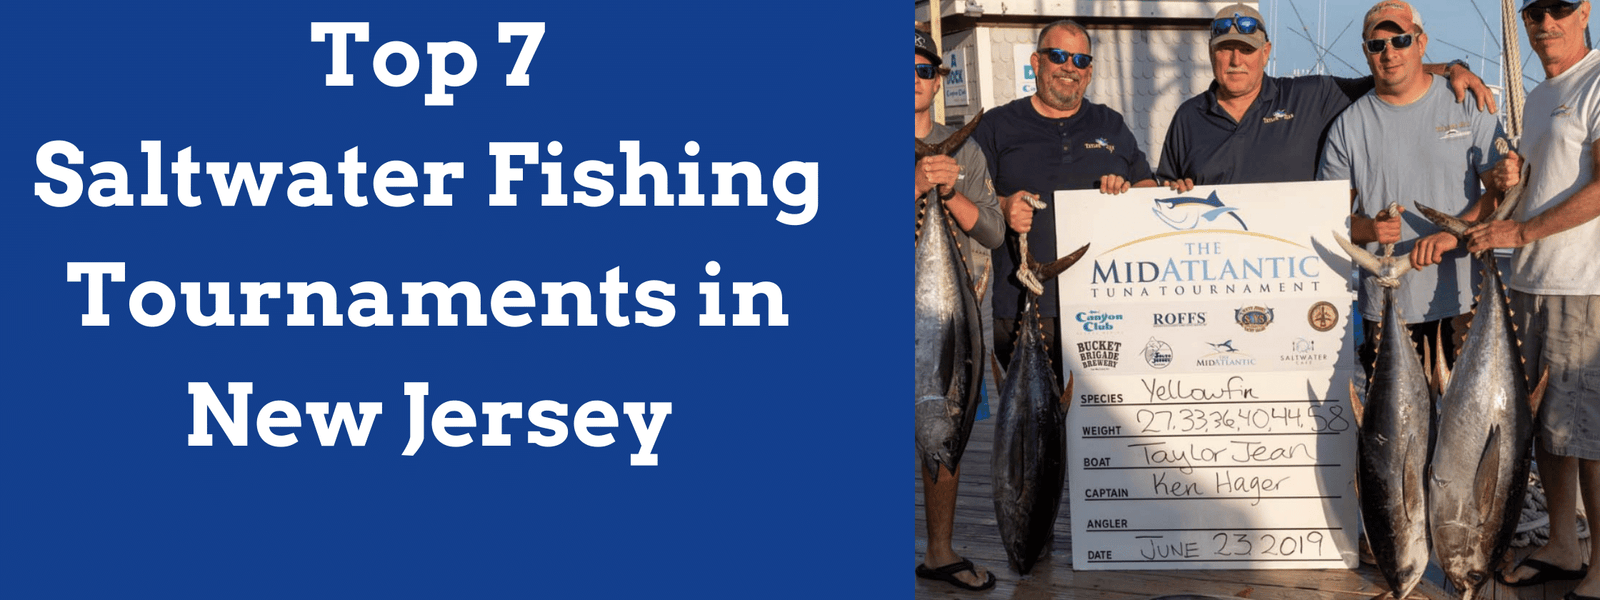 Top 7 Saltwater Fishing Tournaments in New Jersey